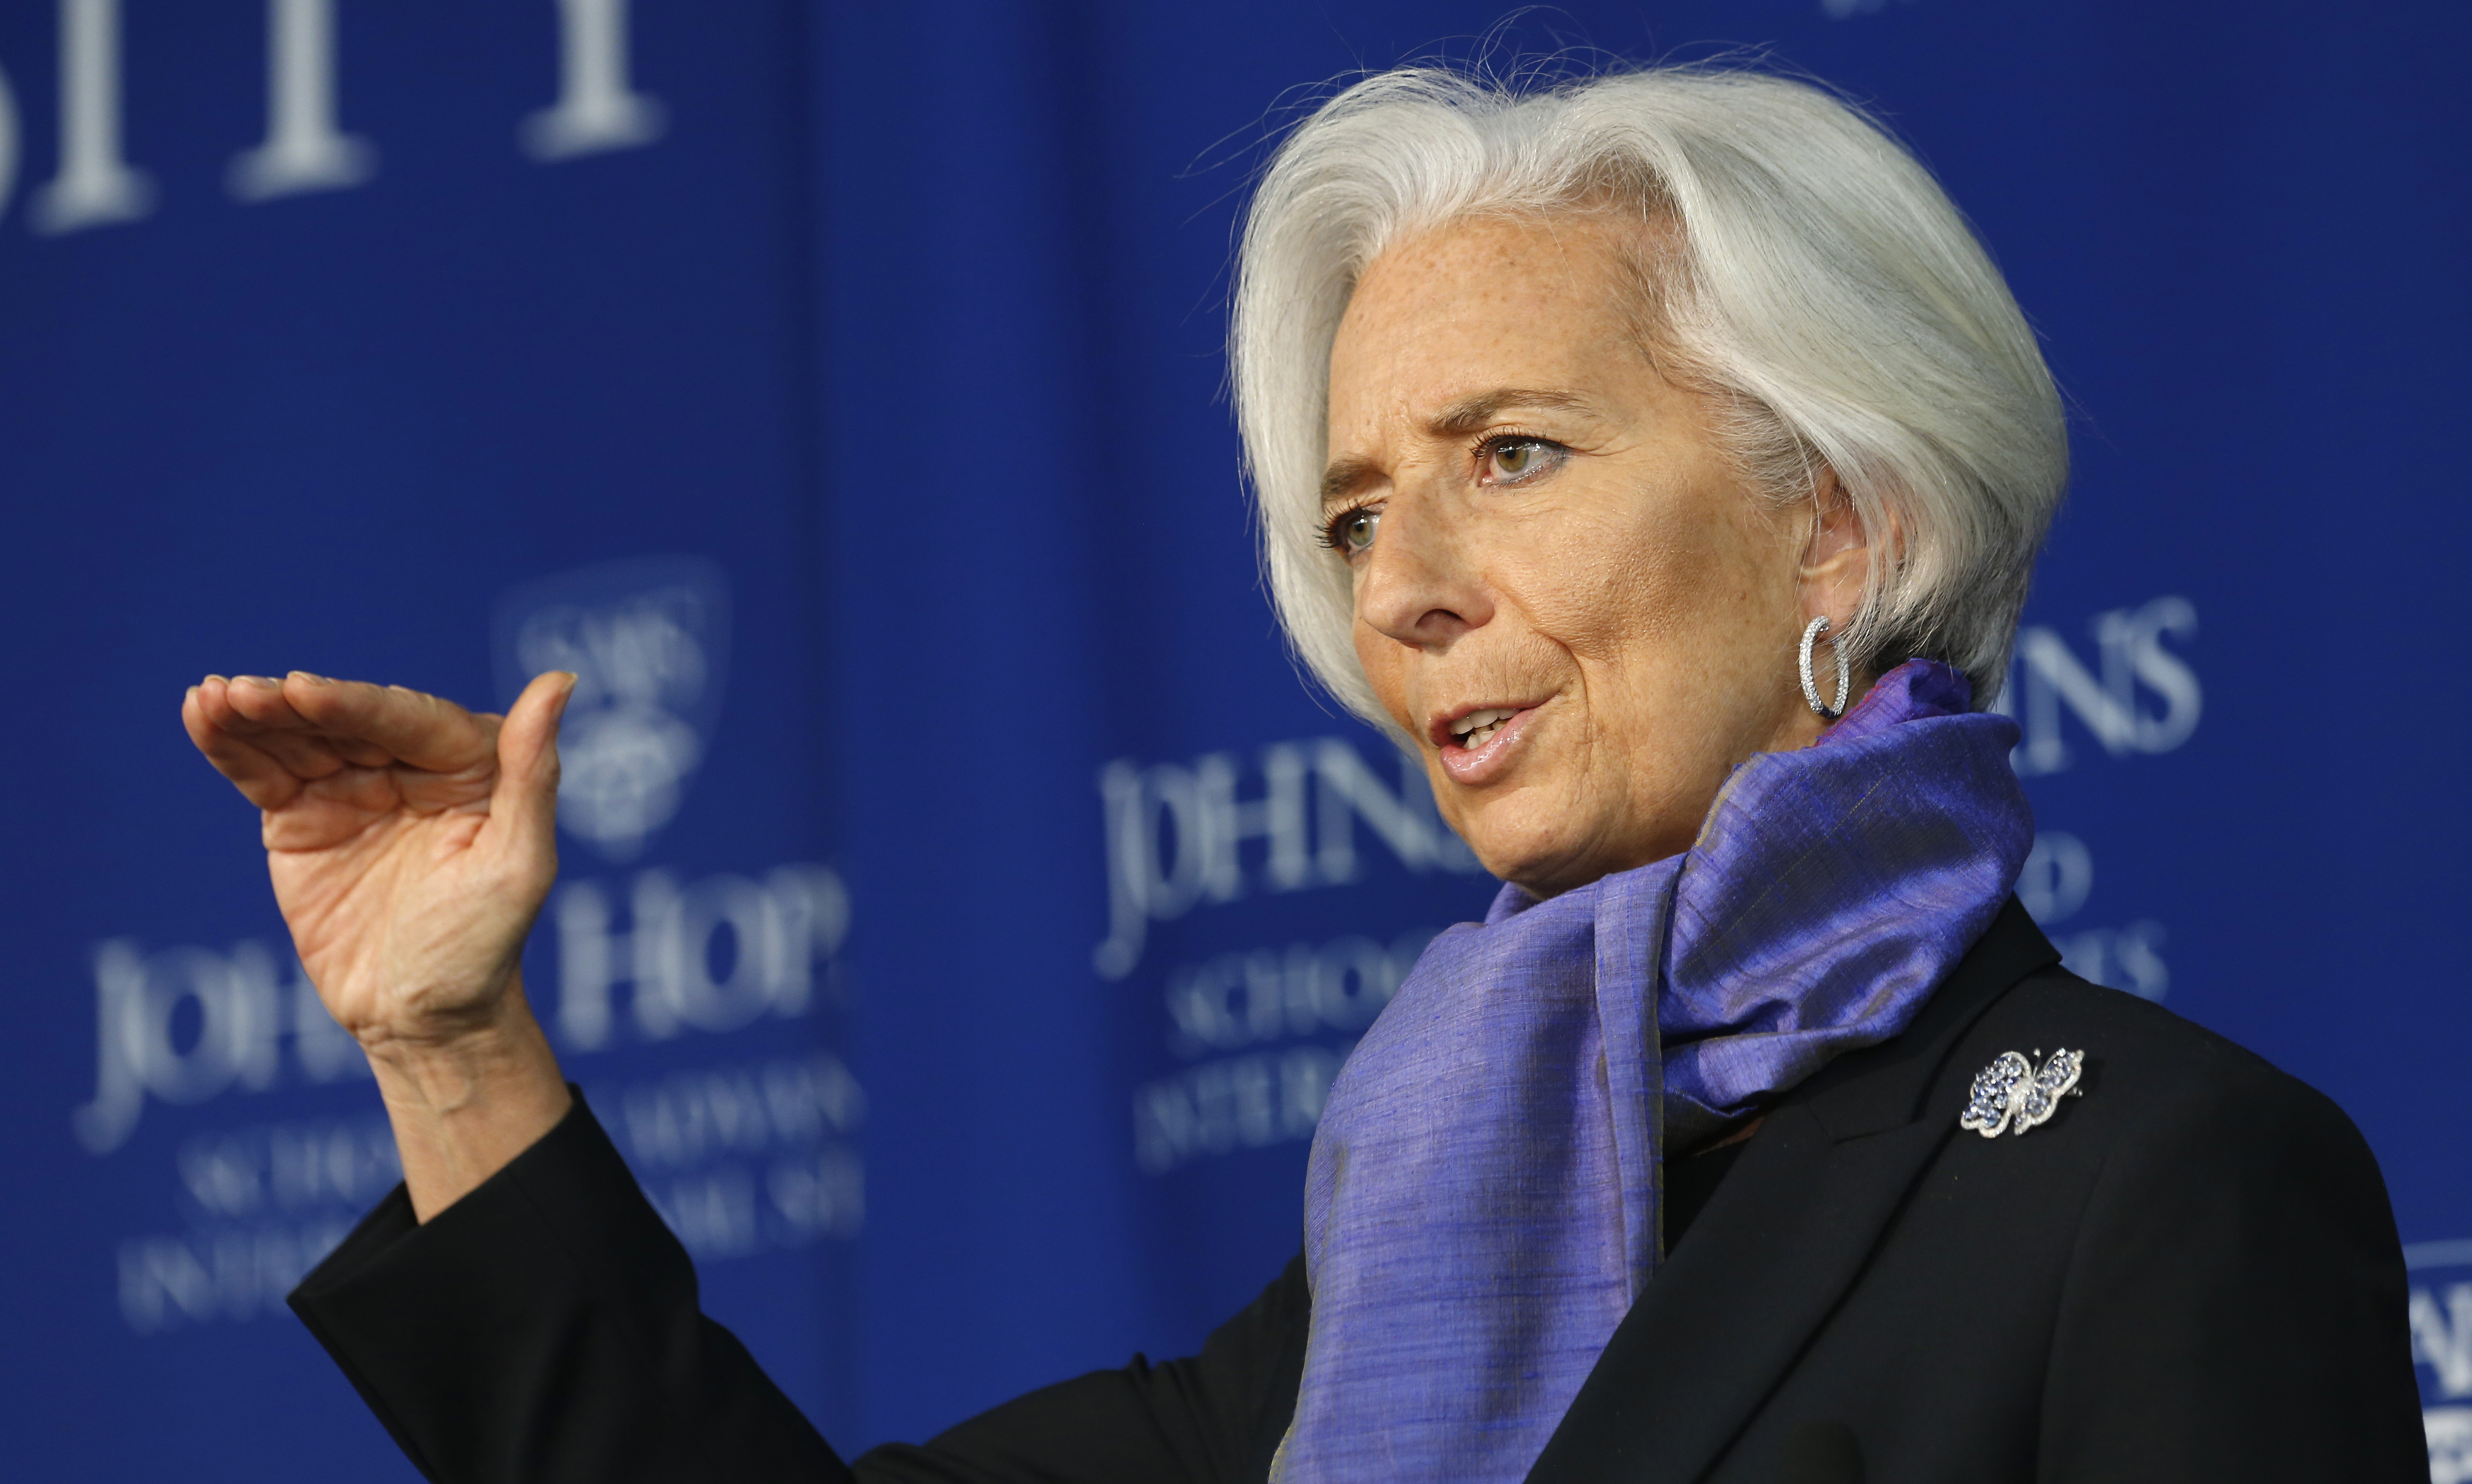 International Monetary Fund Managing Director Christine Lagarde gestures as she speaks about the global economy at the Johns Hopkins School of Advanced International Studies in Washington April 2, 2014. The European Central Bank should ease monetary policy to combat the risk of "low-flation" that could crimp euro zone output and consumer spending, the head of the International Monetary Fund said on Wednesday.

REUTERS/Kevin Lamarque  (UNITED STATES - Tags: POLITICS BUSINESS EDUCATION) - RTR3JO26